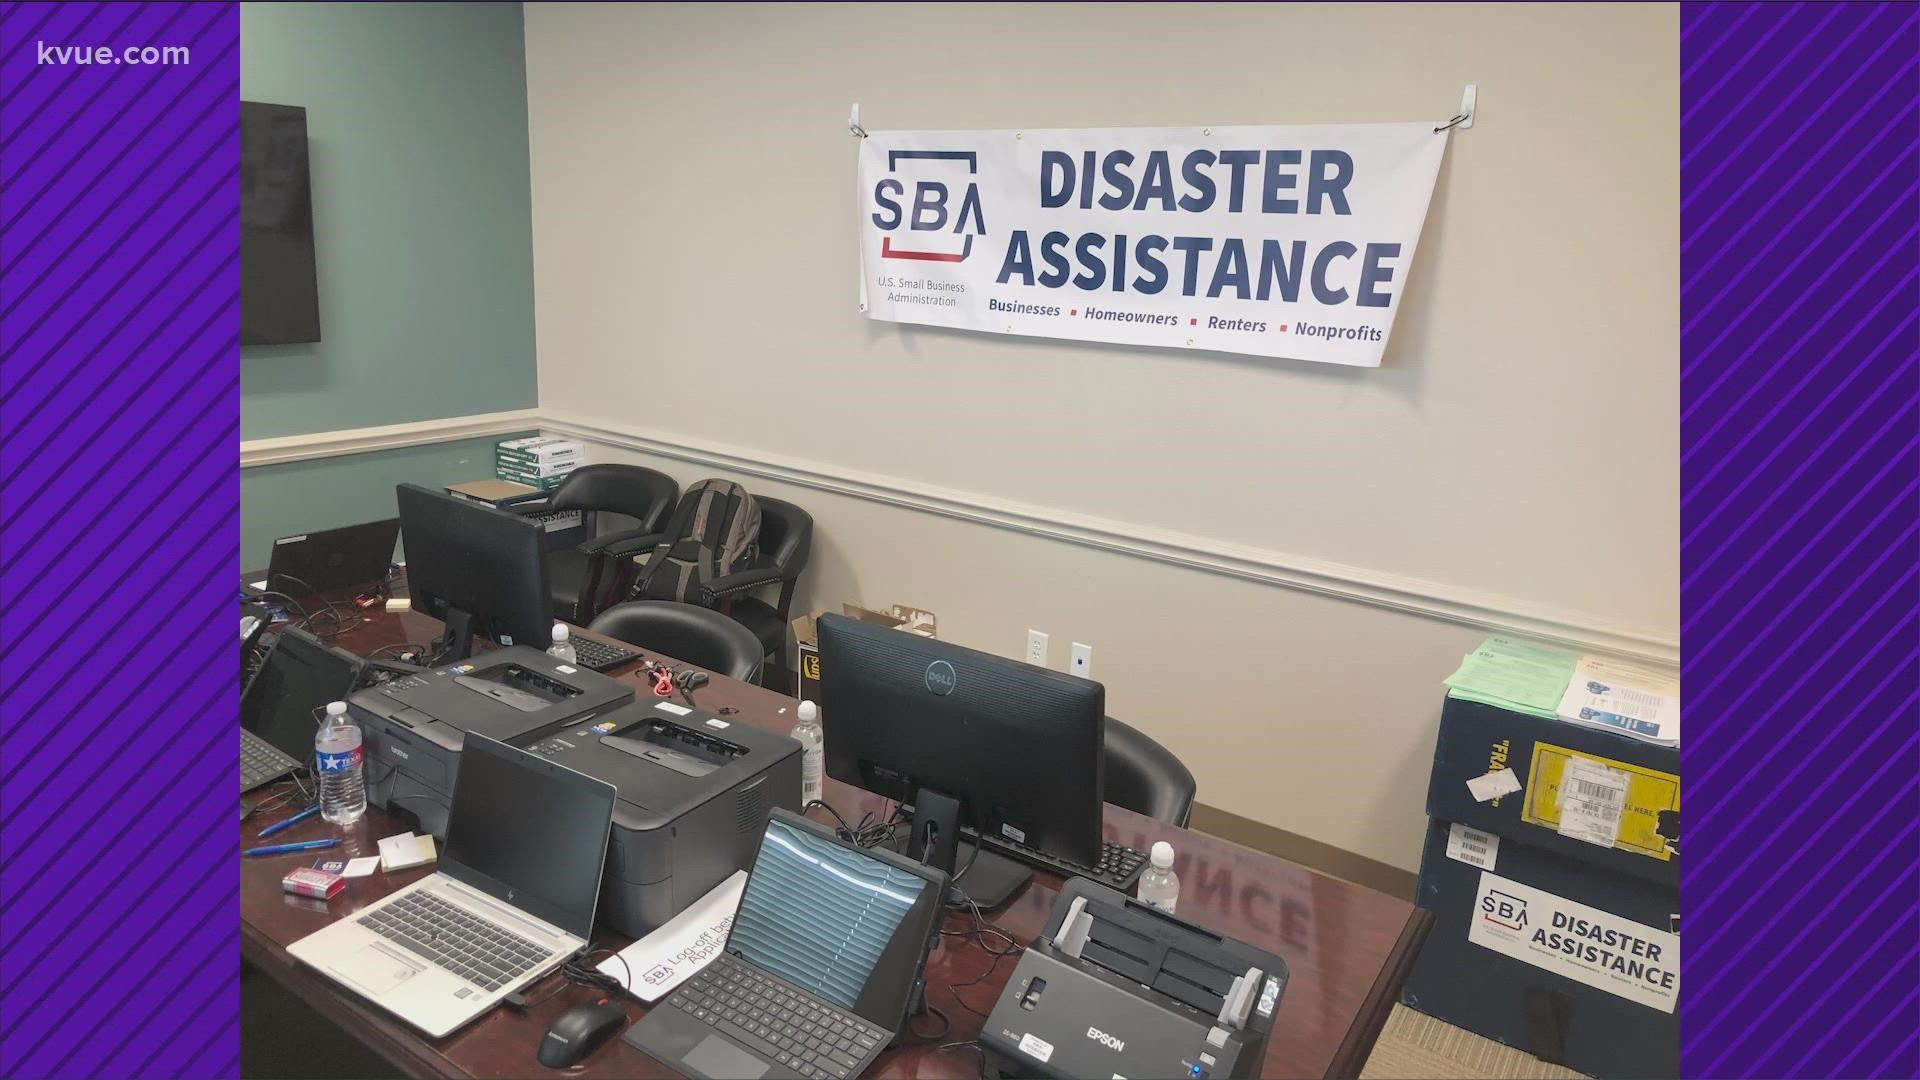 The Elgin office was opened in response to the March 21 tornadoes. Business and homeowners are encouraged to learn more about loan options available to them.